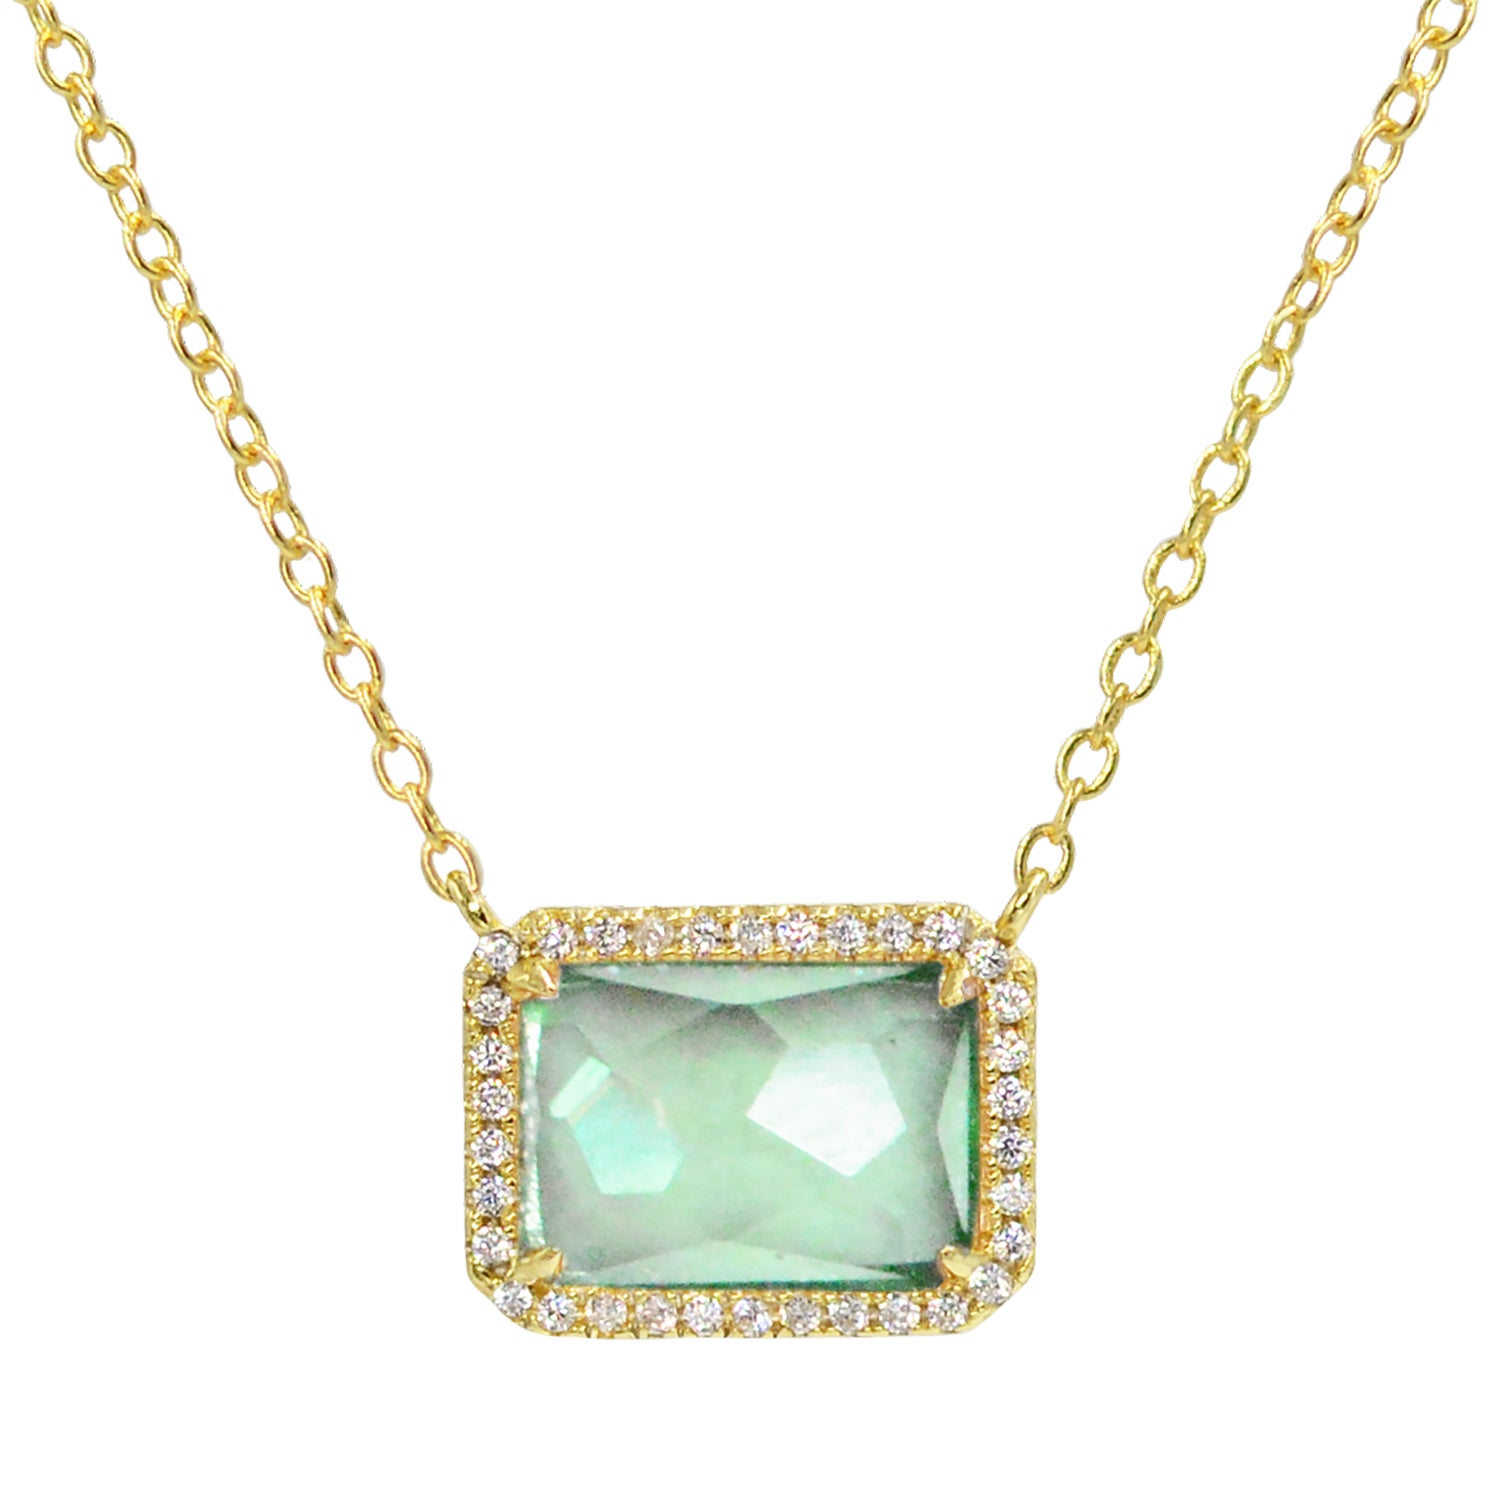 Atiena lab-created rectangle gemstone necklace in paraiba green and gold